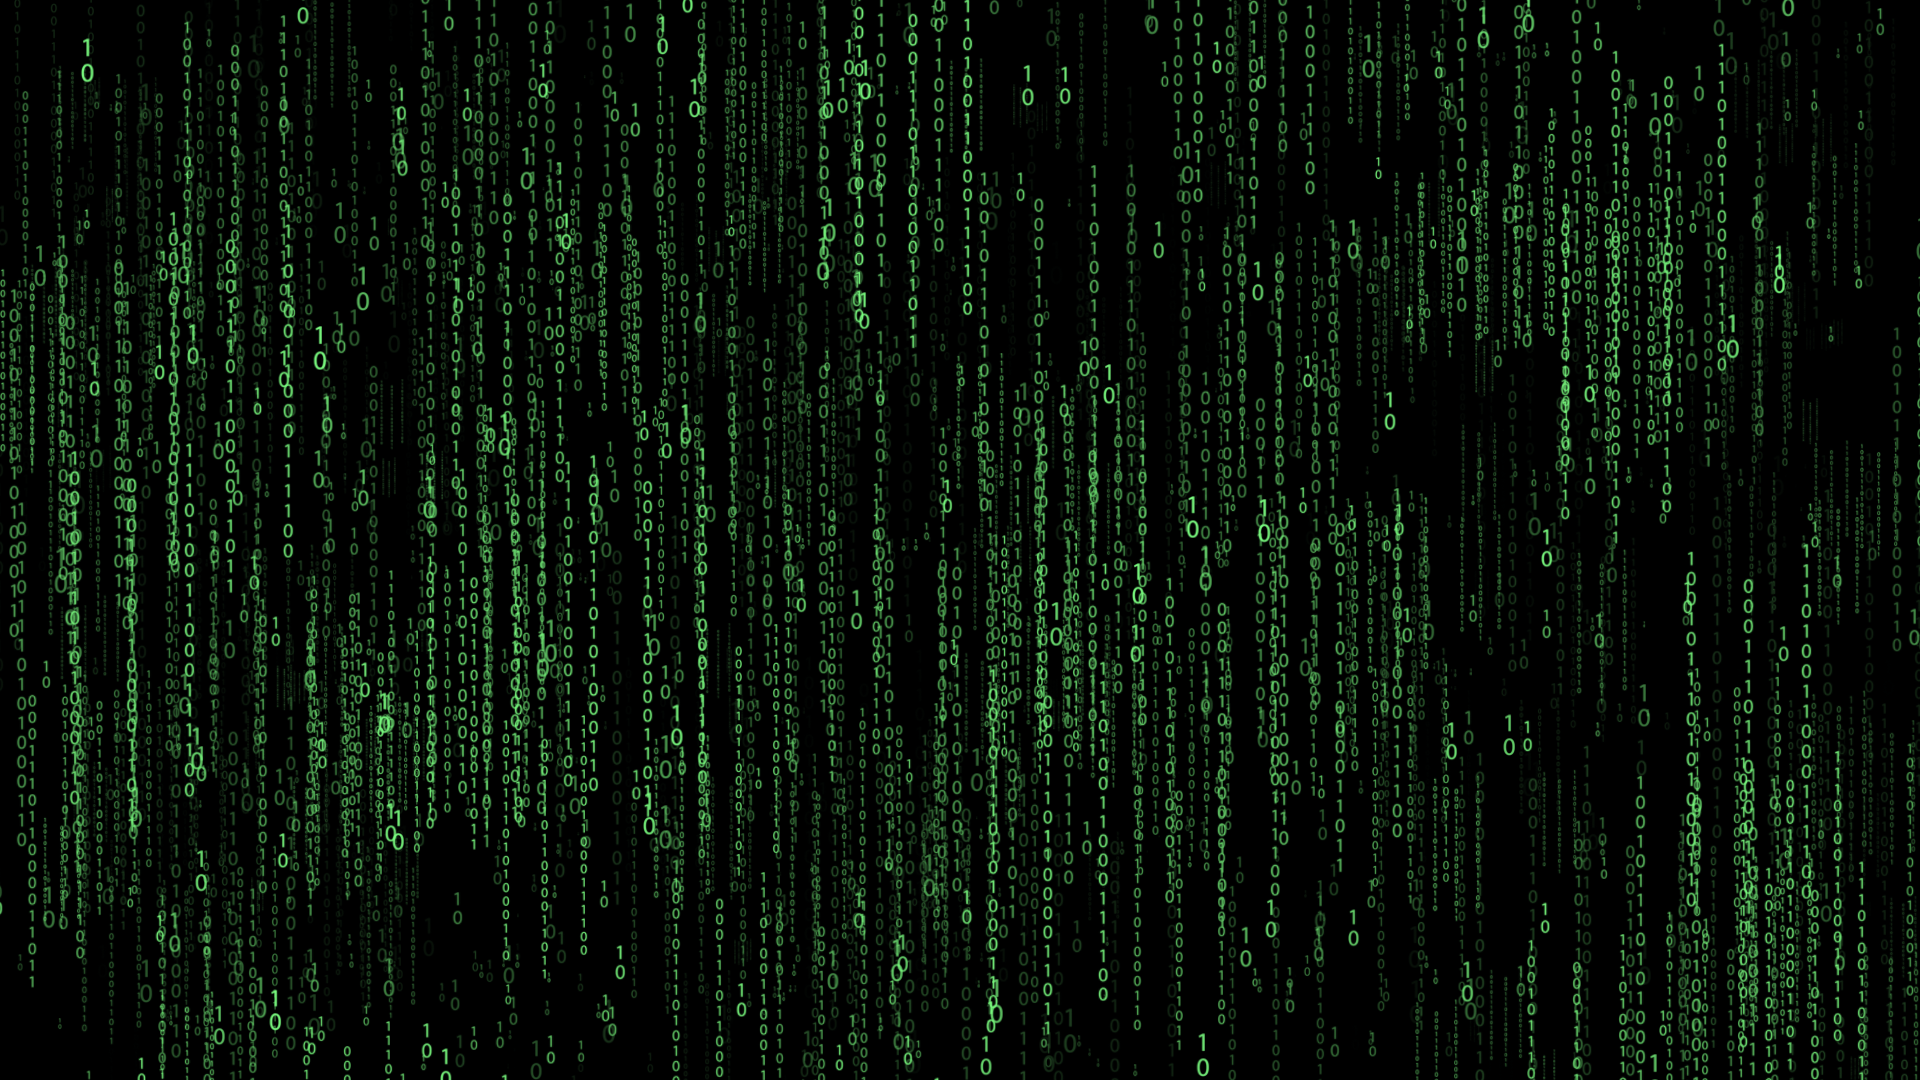 45 Animated Binary Code Wallpapers  Download at WallpaperBro  Code  wallpaper Science background Computer science gifts